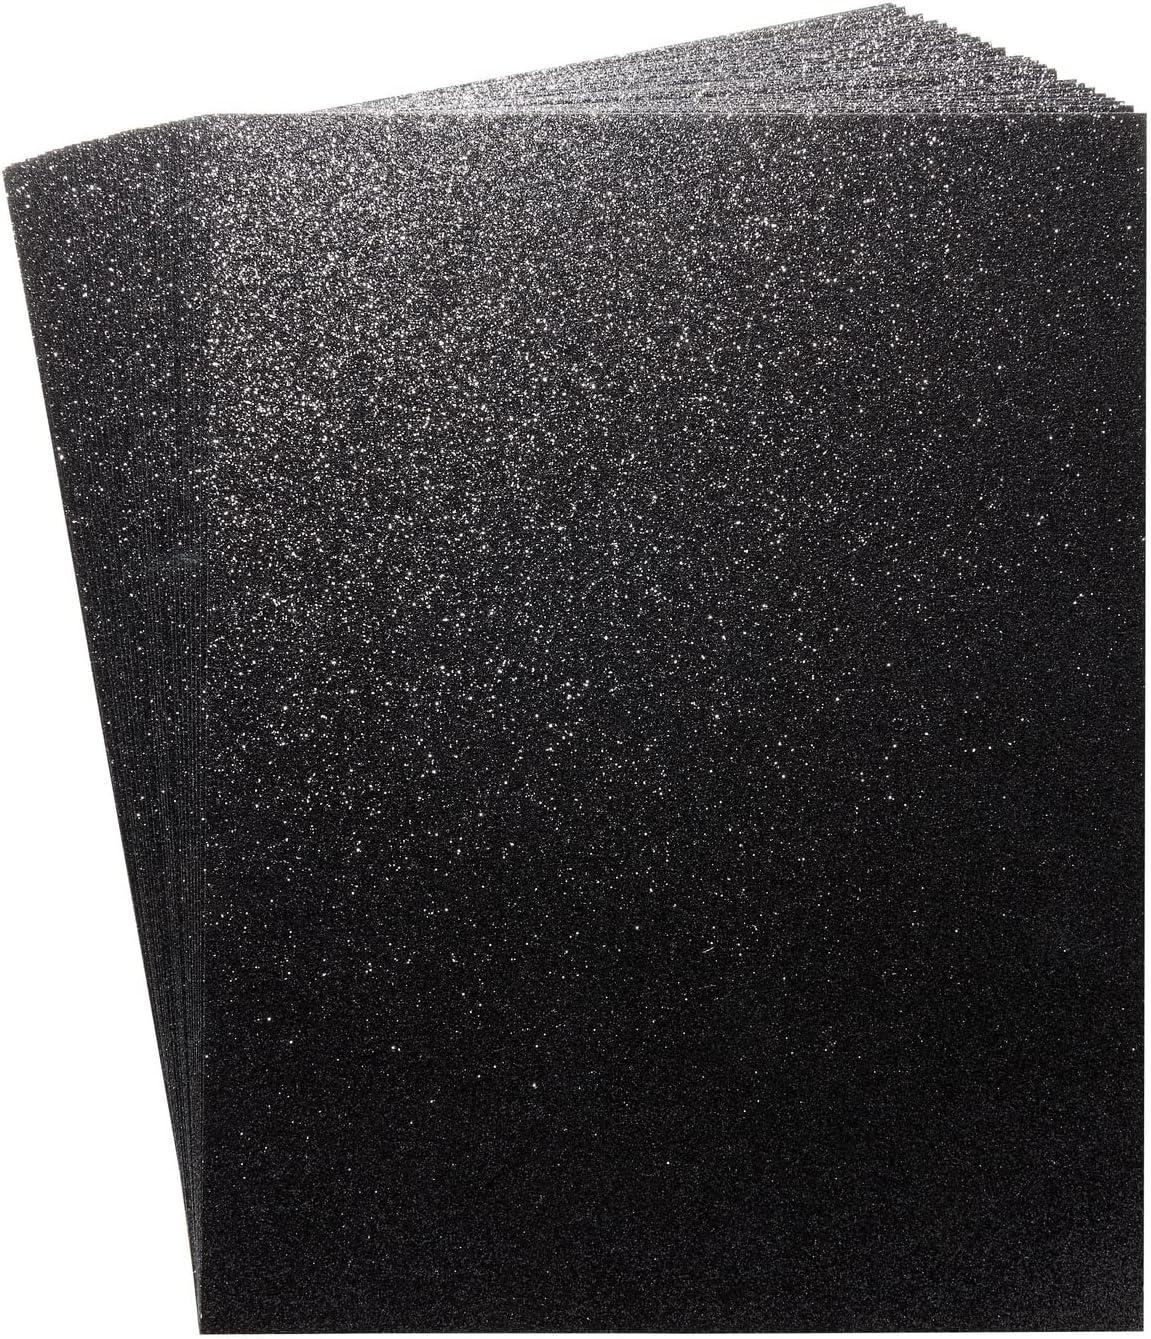 24 Sheets Black Glitter Cardstock Paper for Crafts Birthday Card Making  Wedding Invitations DIY Party Decorations (280gsm 8.5 x 11 In)